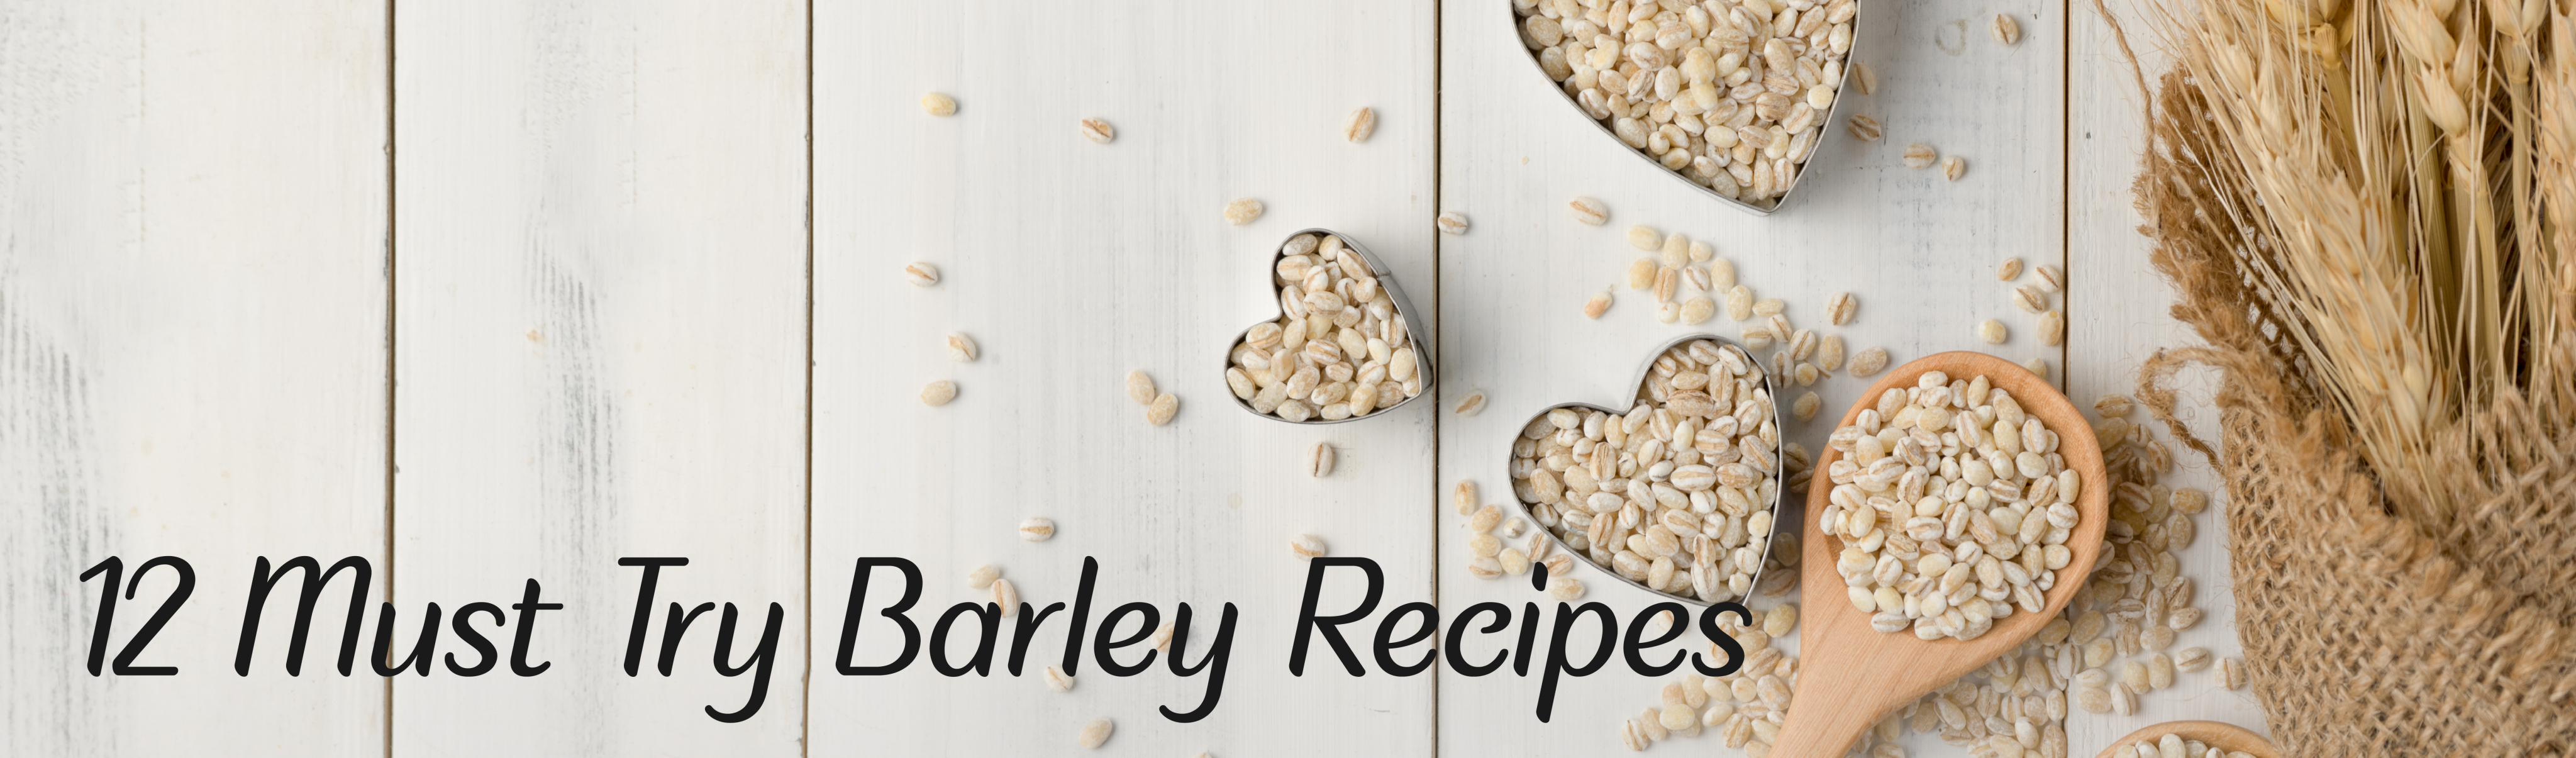 12 Must Try Barley Recipes